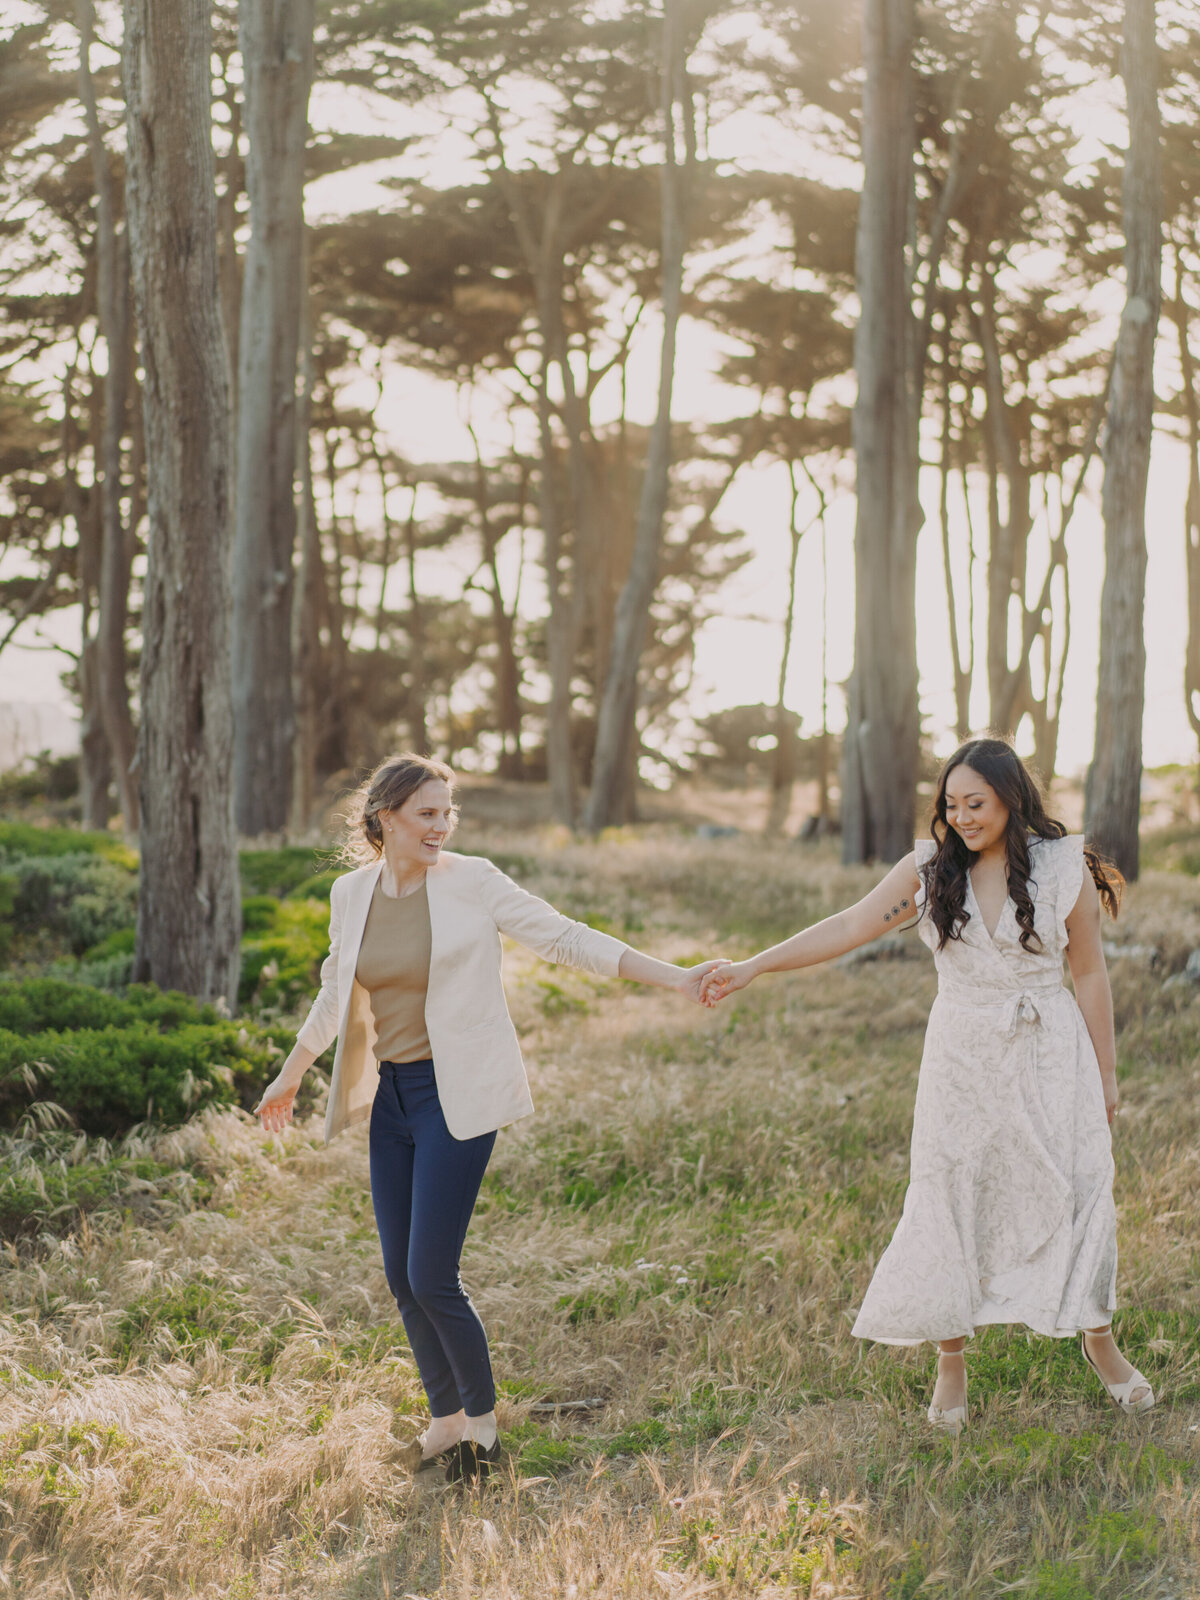 Therese + Melanie San Francisco Land's End Sutro Baths Engagement Session Cassie Valente Photography 0026